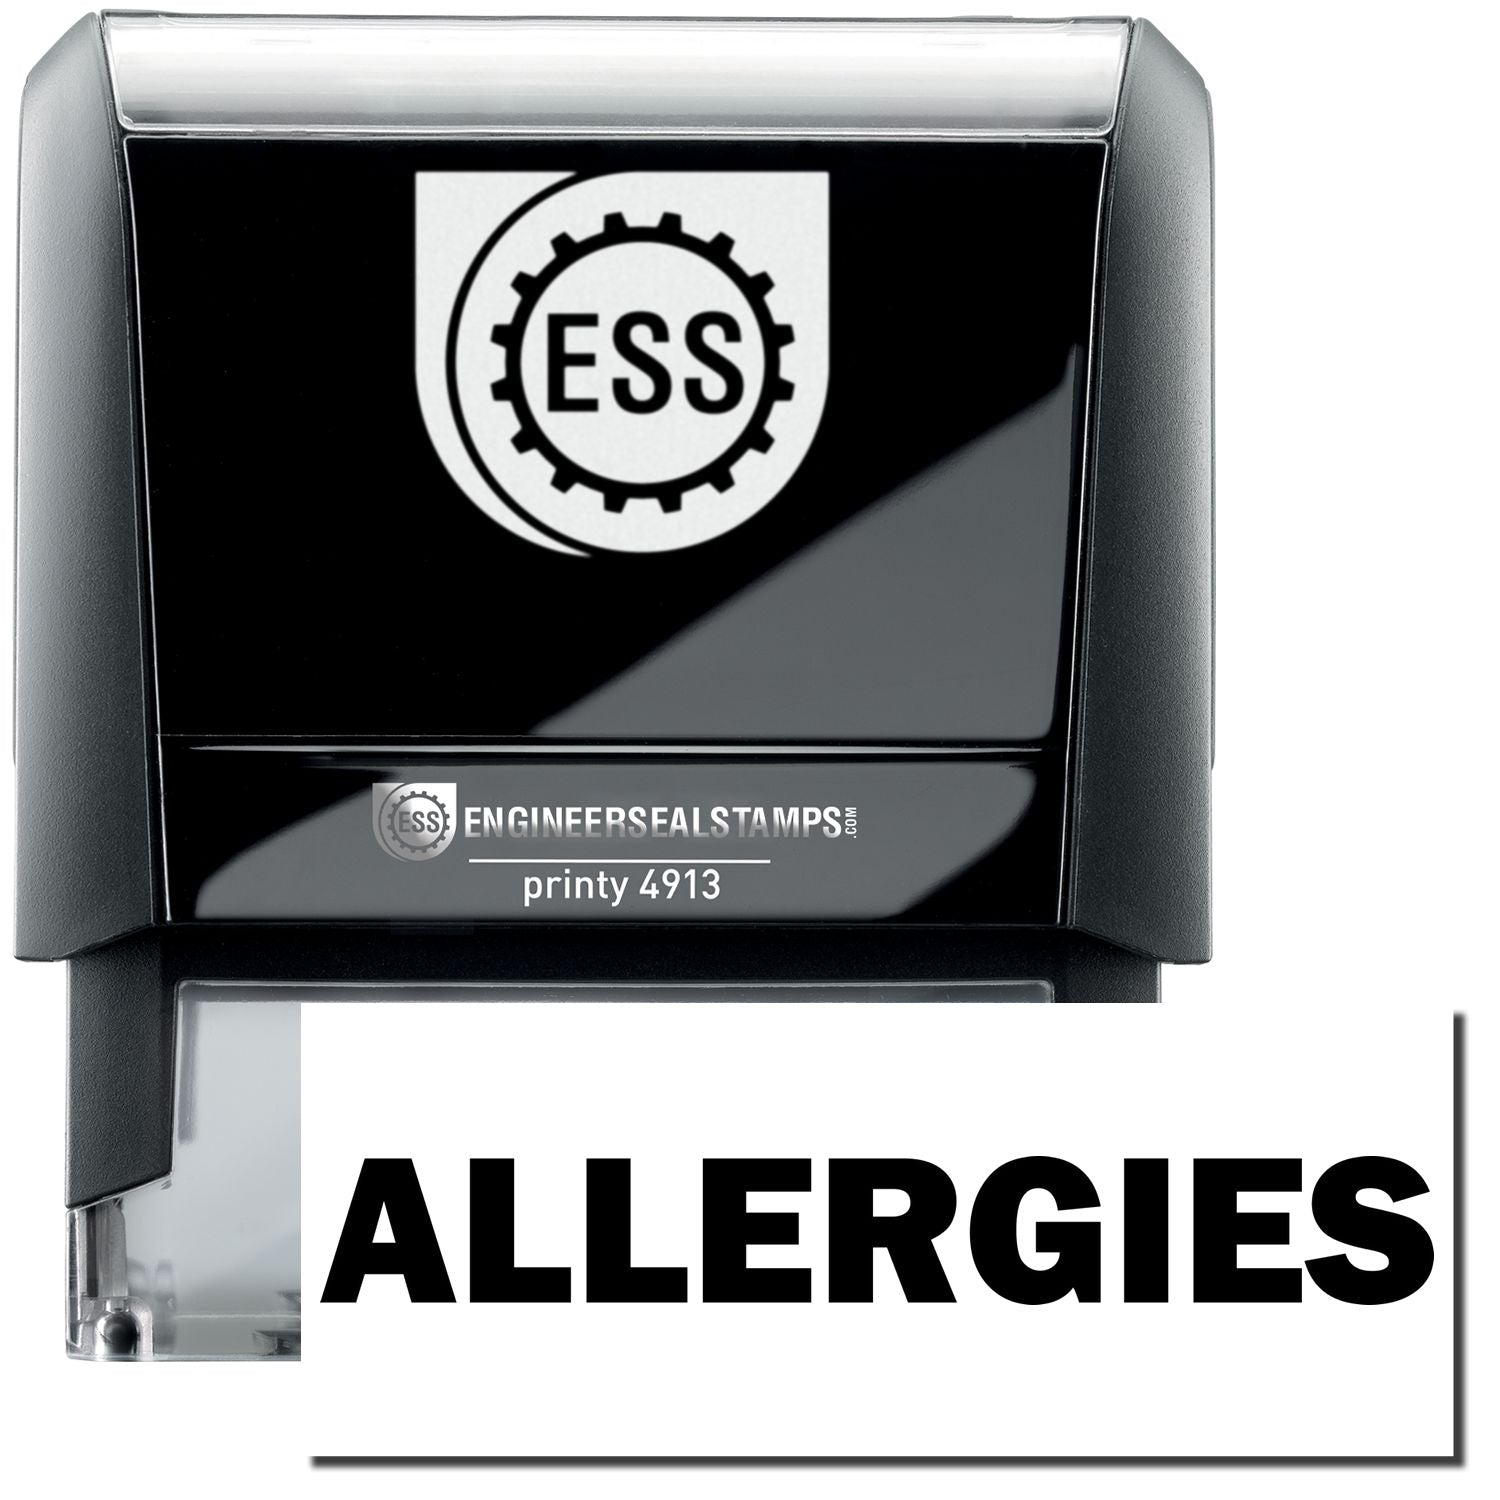 A self-inking stamp with a stamped image showing how the text "ALLERGIES" in a large bold font is displayed by it after stamping.